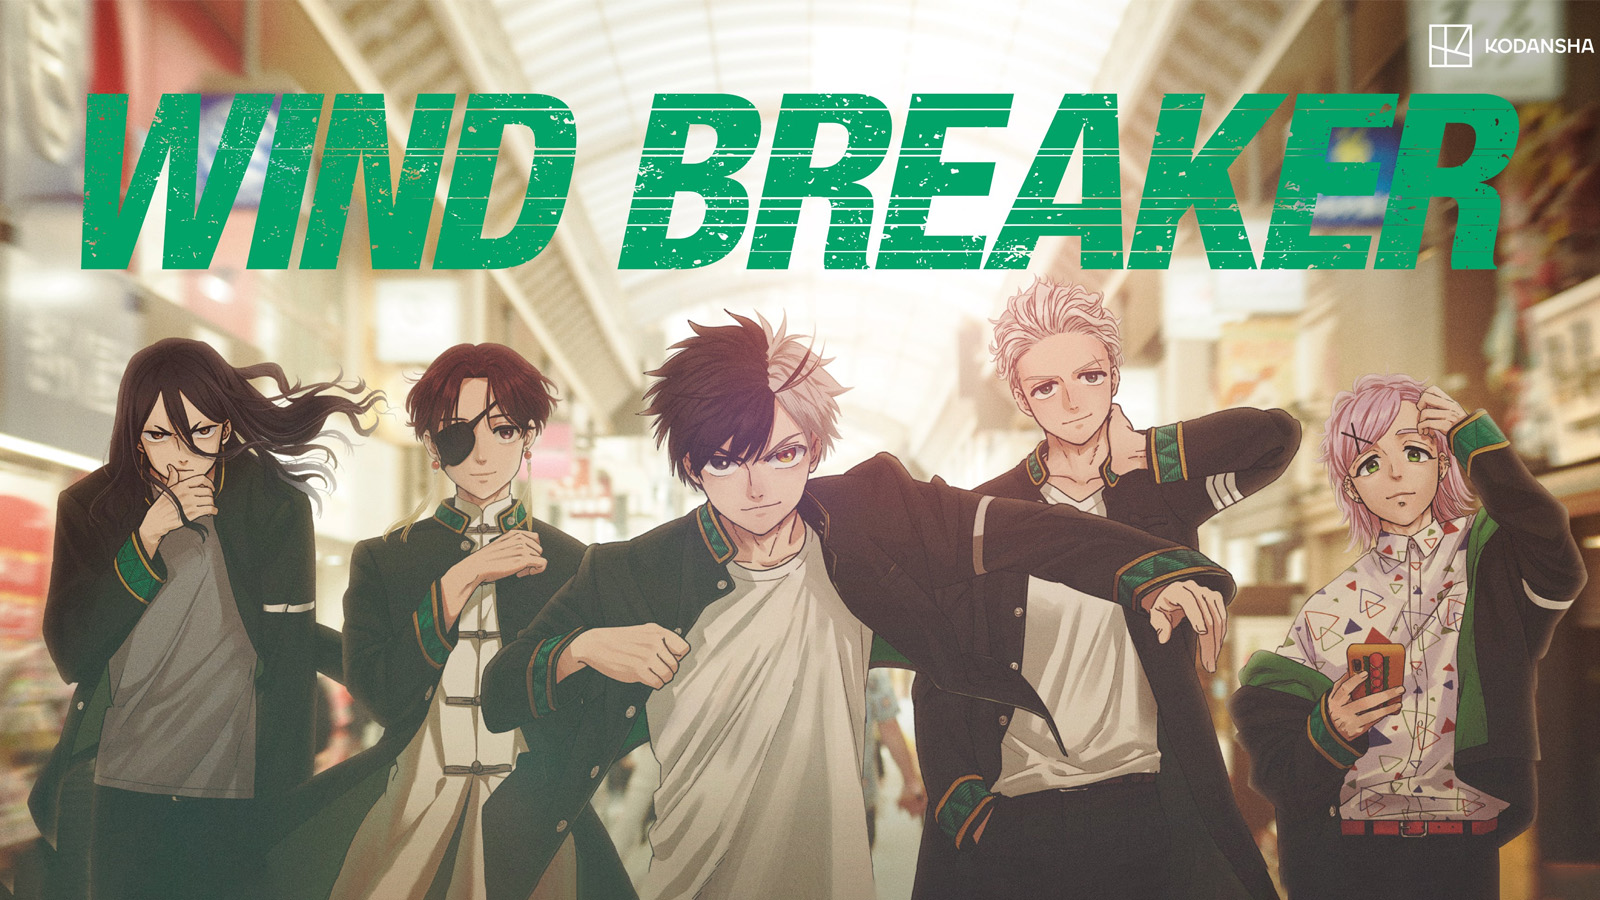 Code Breaker — First Impression | Draggle's Anime Blog